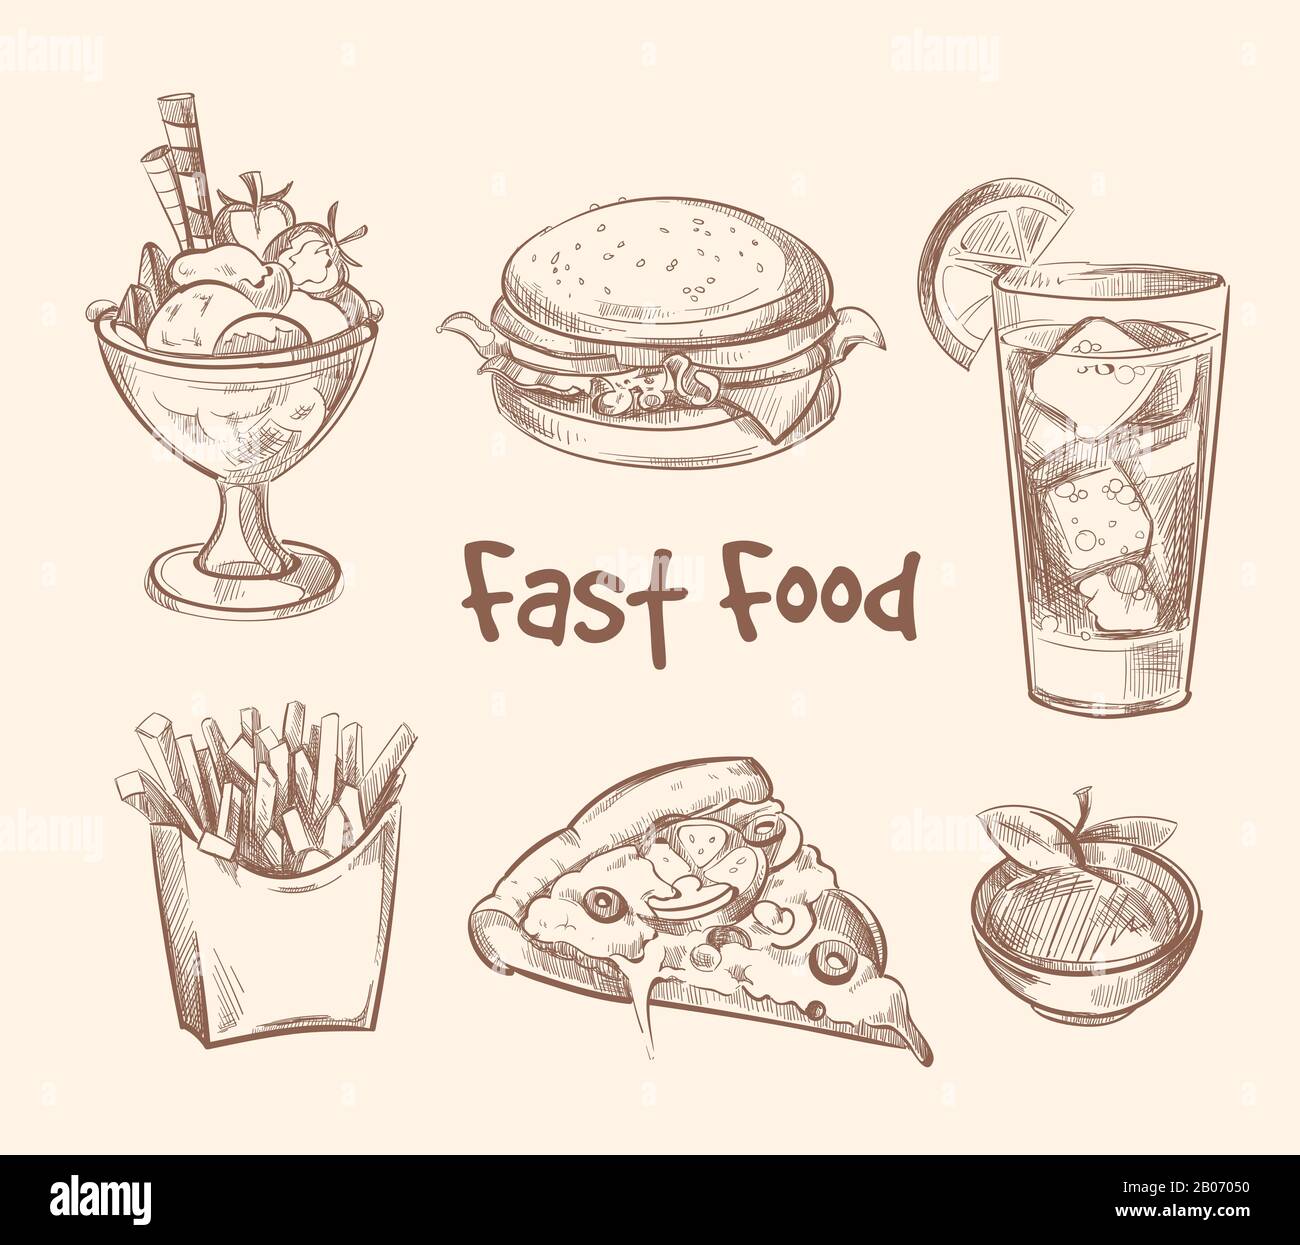 Fast food vector set in hand drawn sketch style. Burger and hamburger, pizza and ice cream illustration Stock Vector